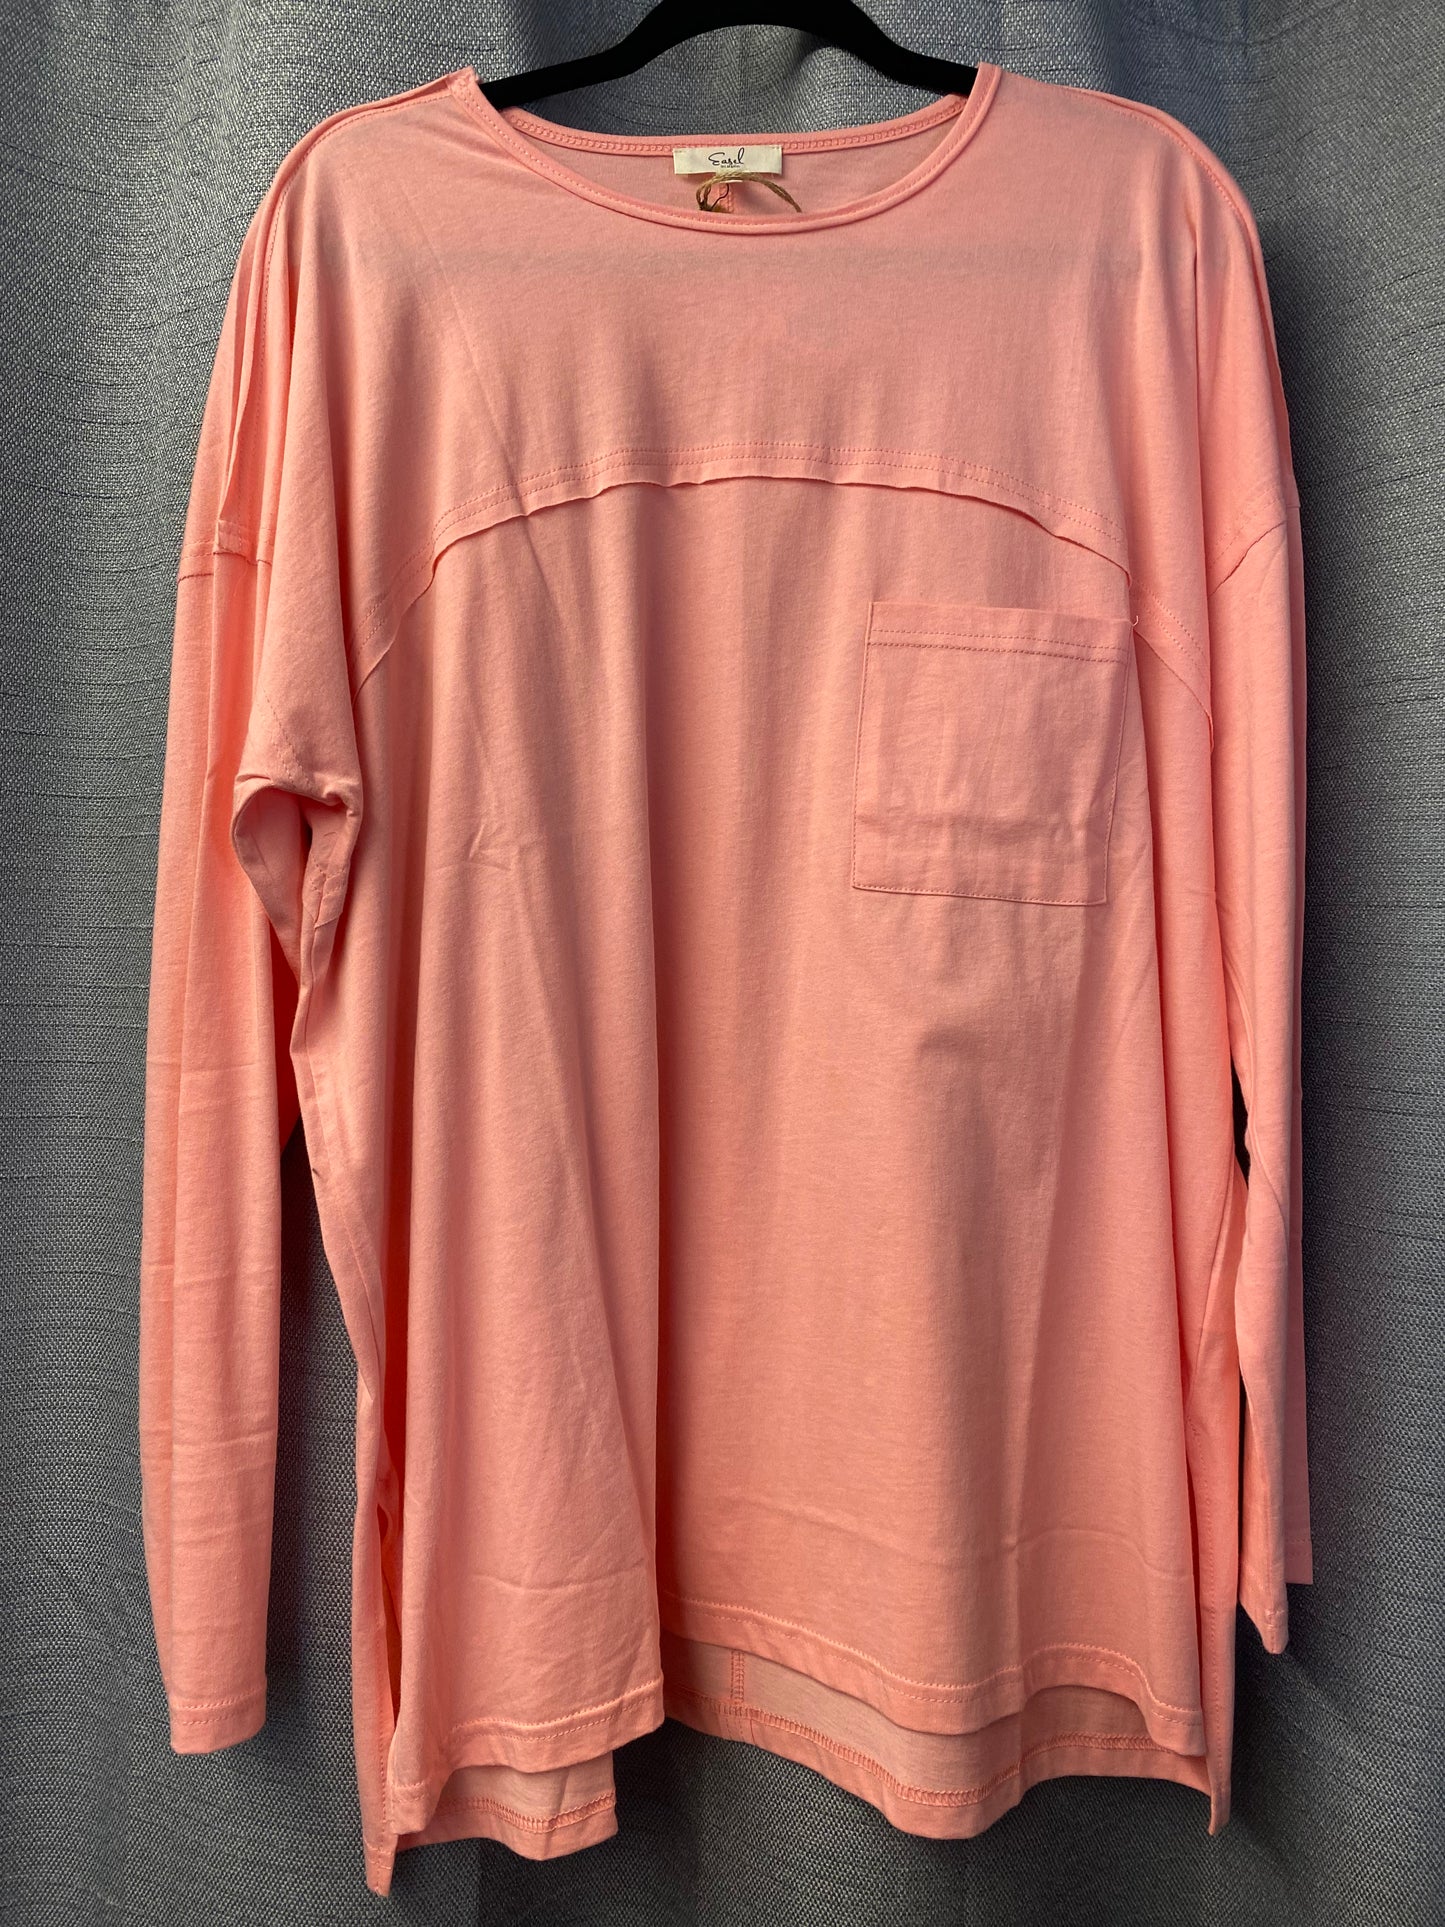 Easel Long Sleeve Coral Top